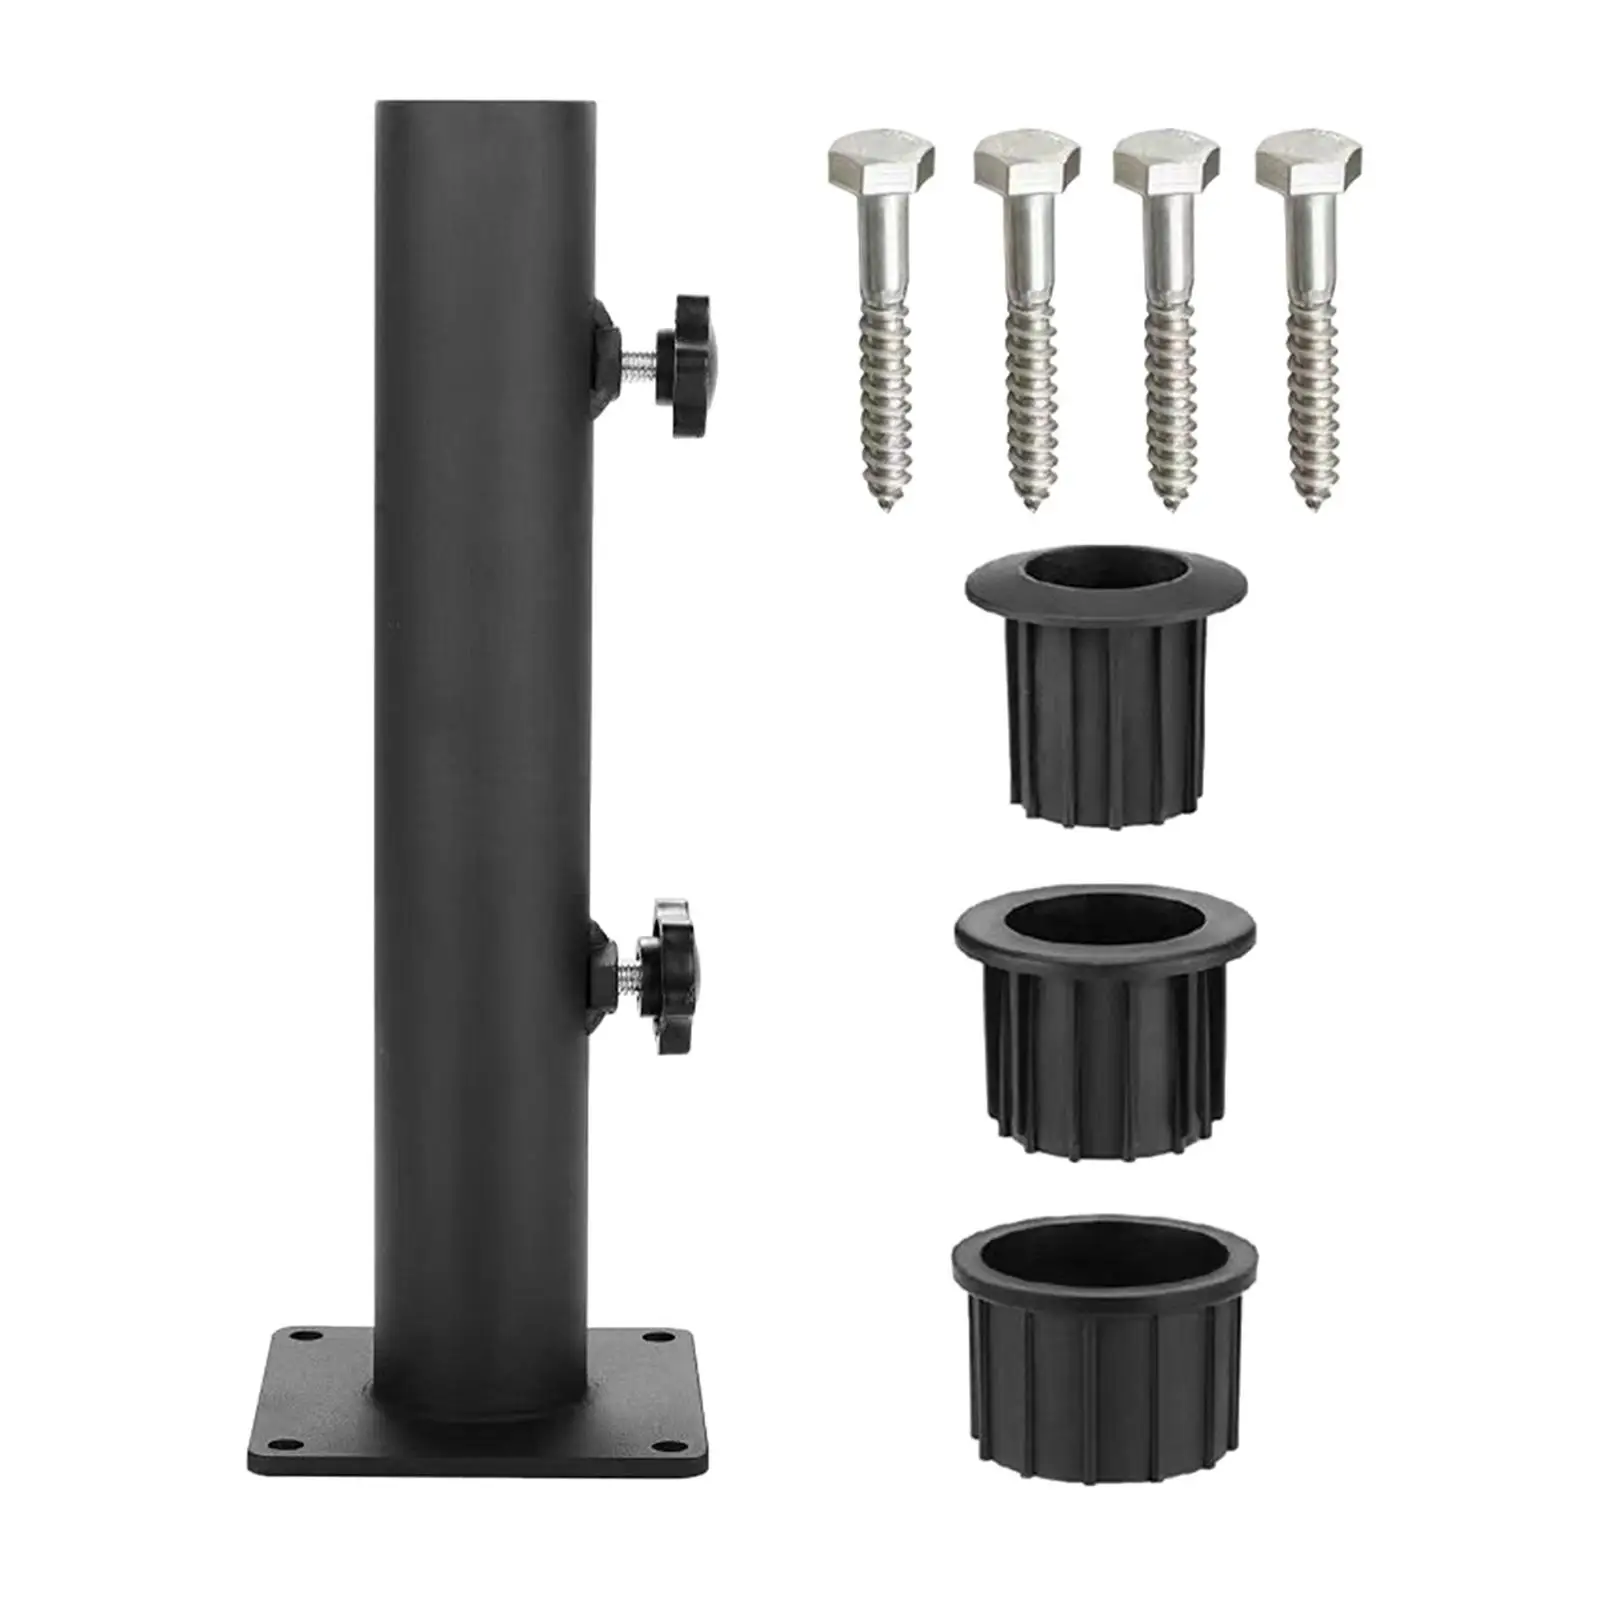 Deck Umbrella Stand Heavy Duty Weather Resistant Adjustable Patio Umbrella Stand Mount for Backyard Pontoons Balcony Outside